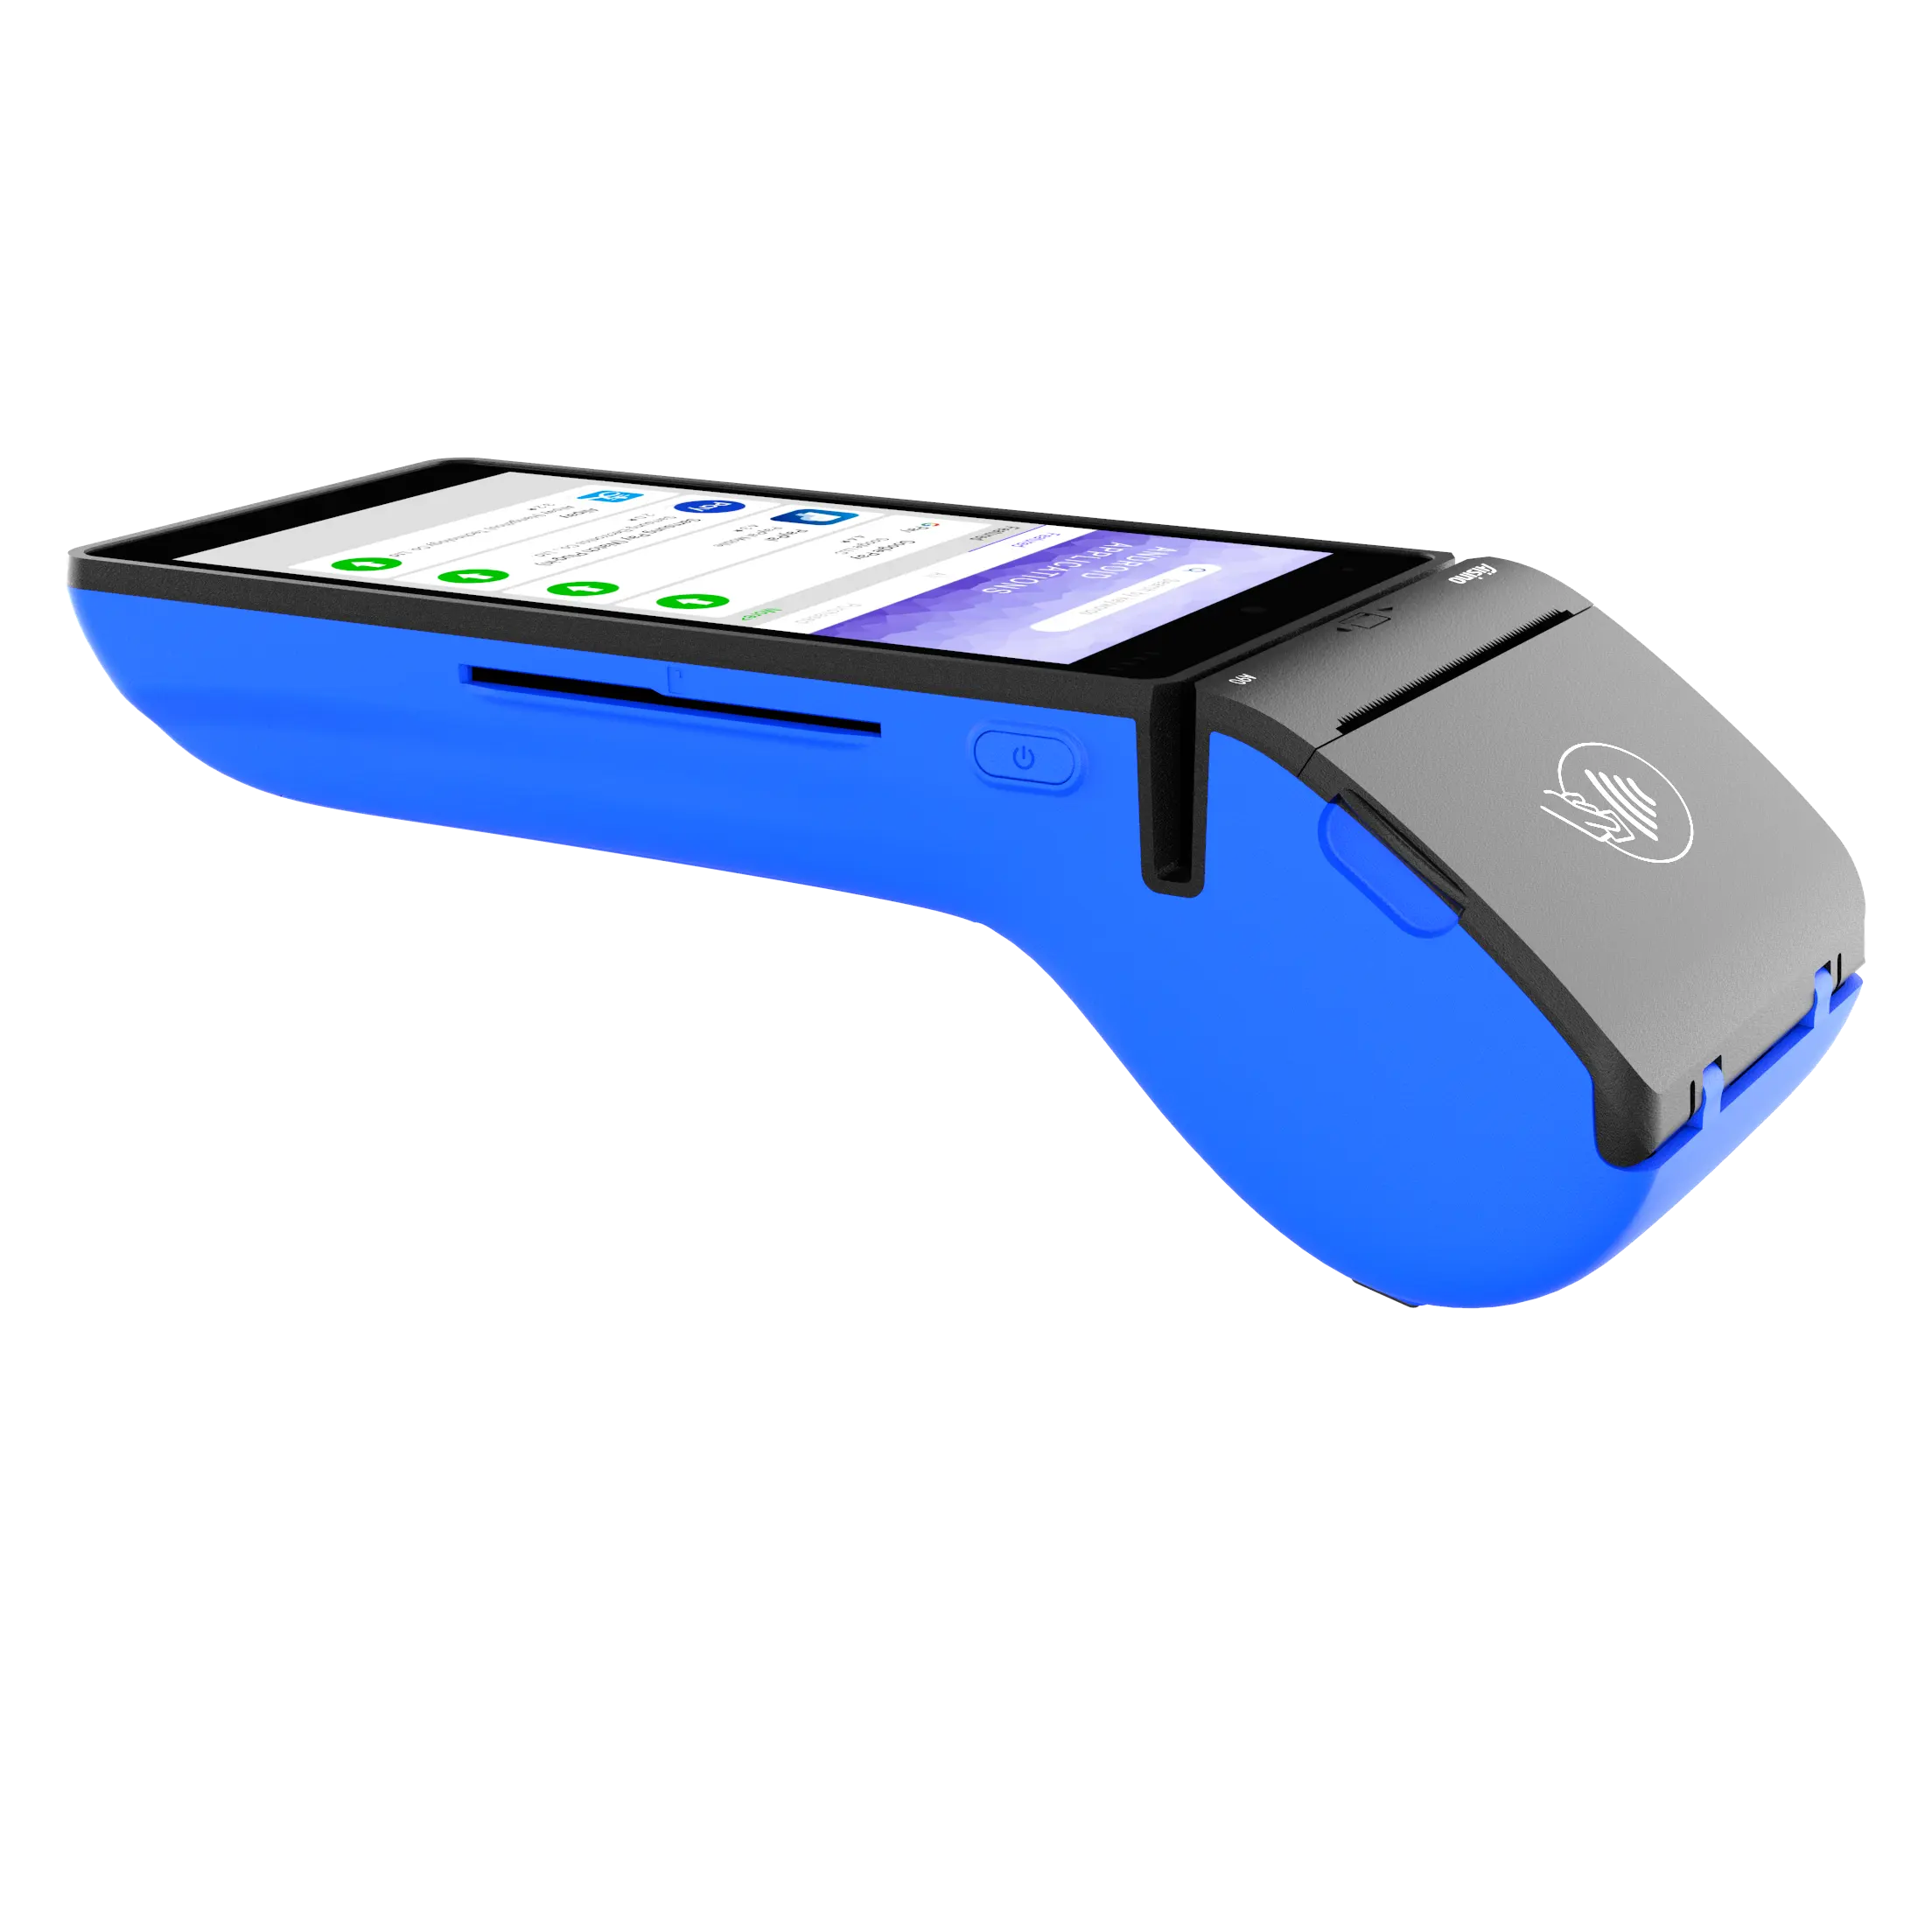 POS EDC All in One Payment gets everything you need to process payments